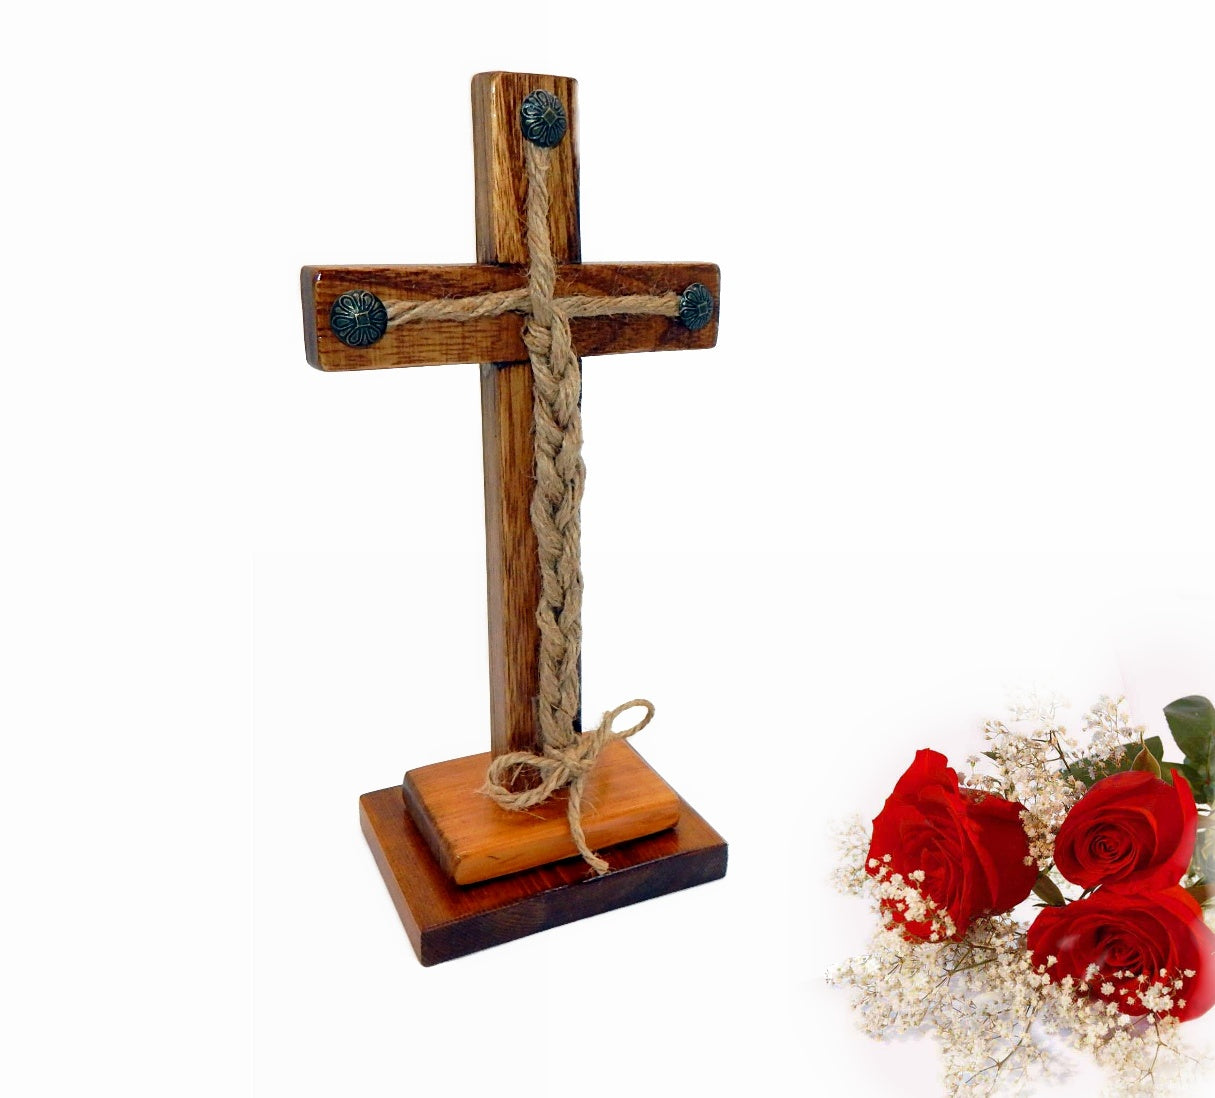 Wood Cross on Double Pedestal with Jute Rope 11x5" tall - Unity Braids